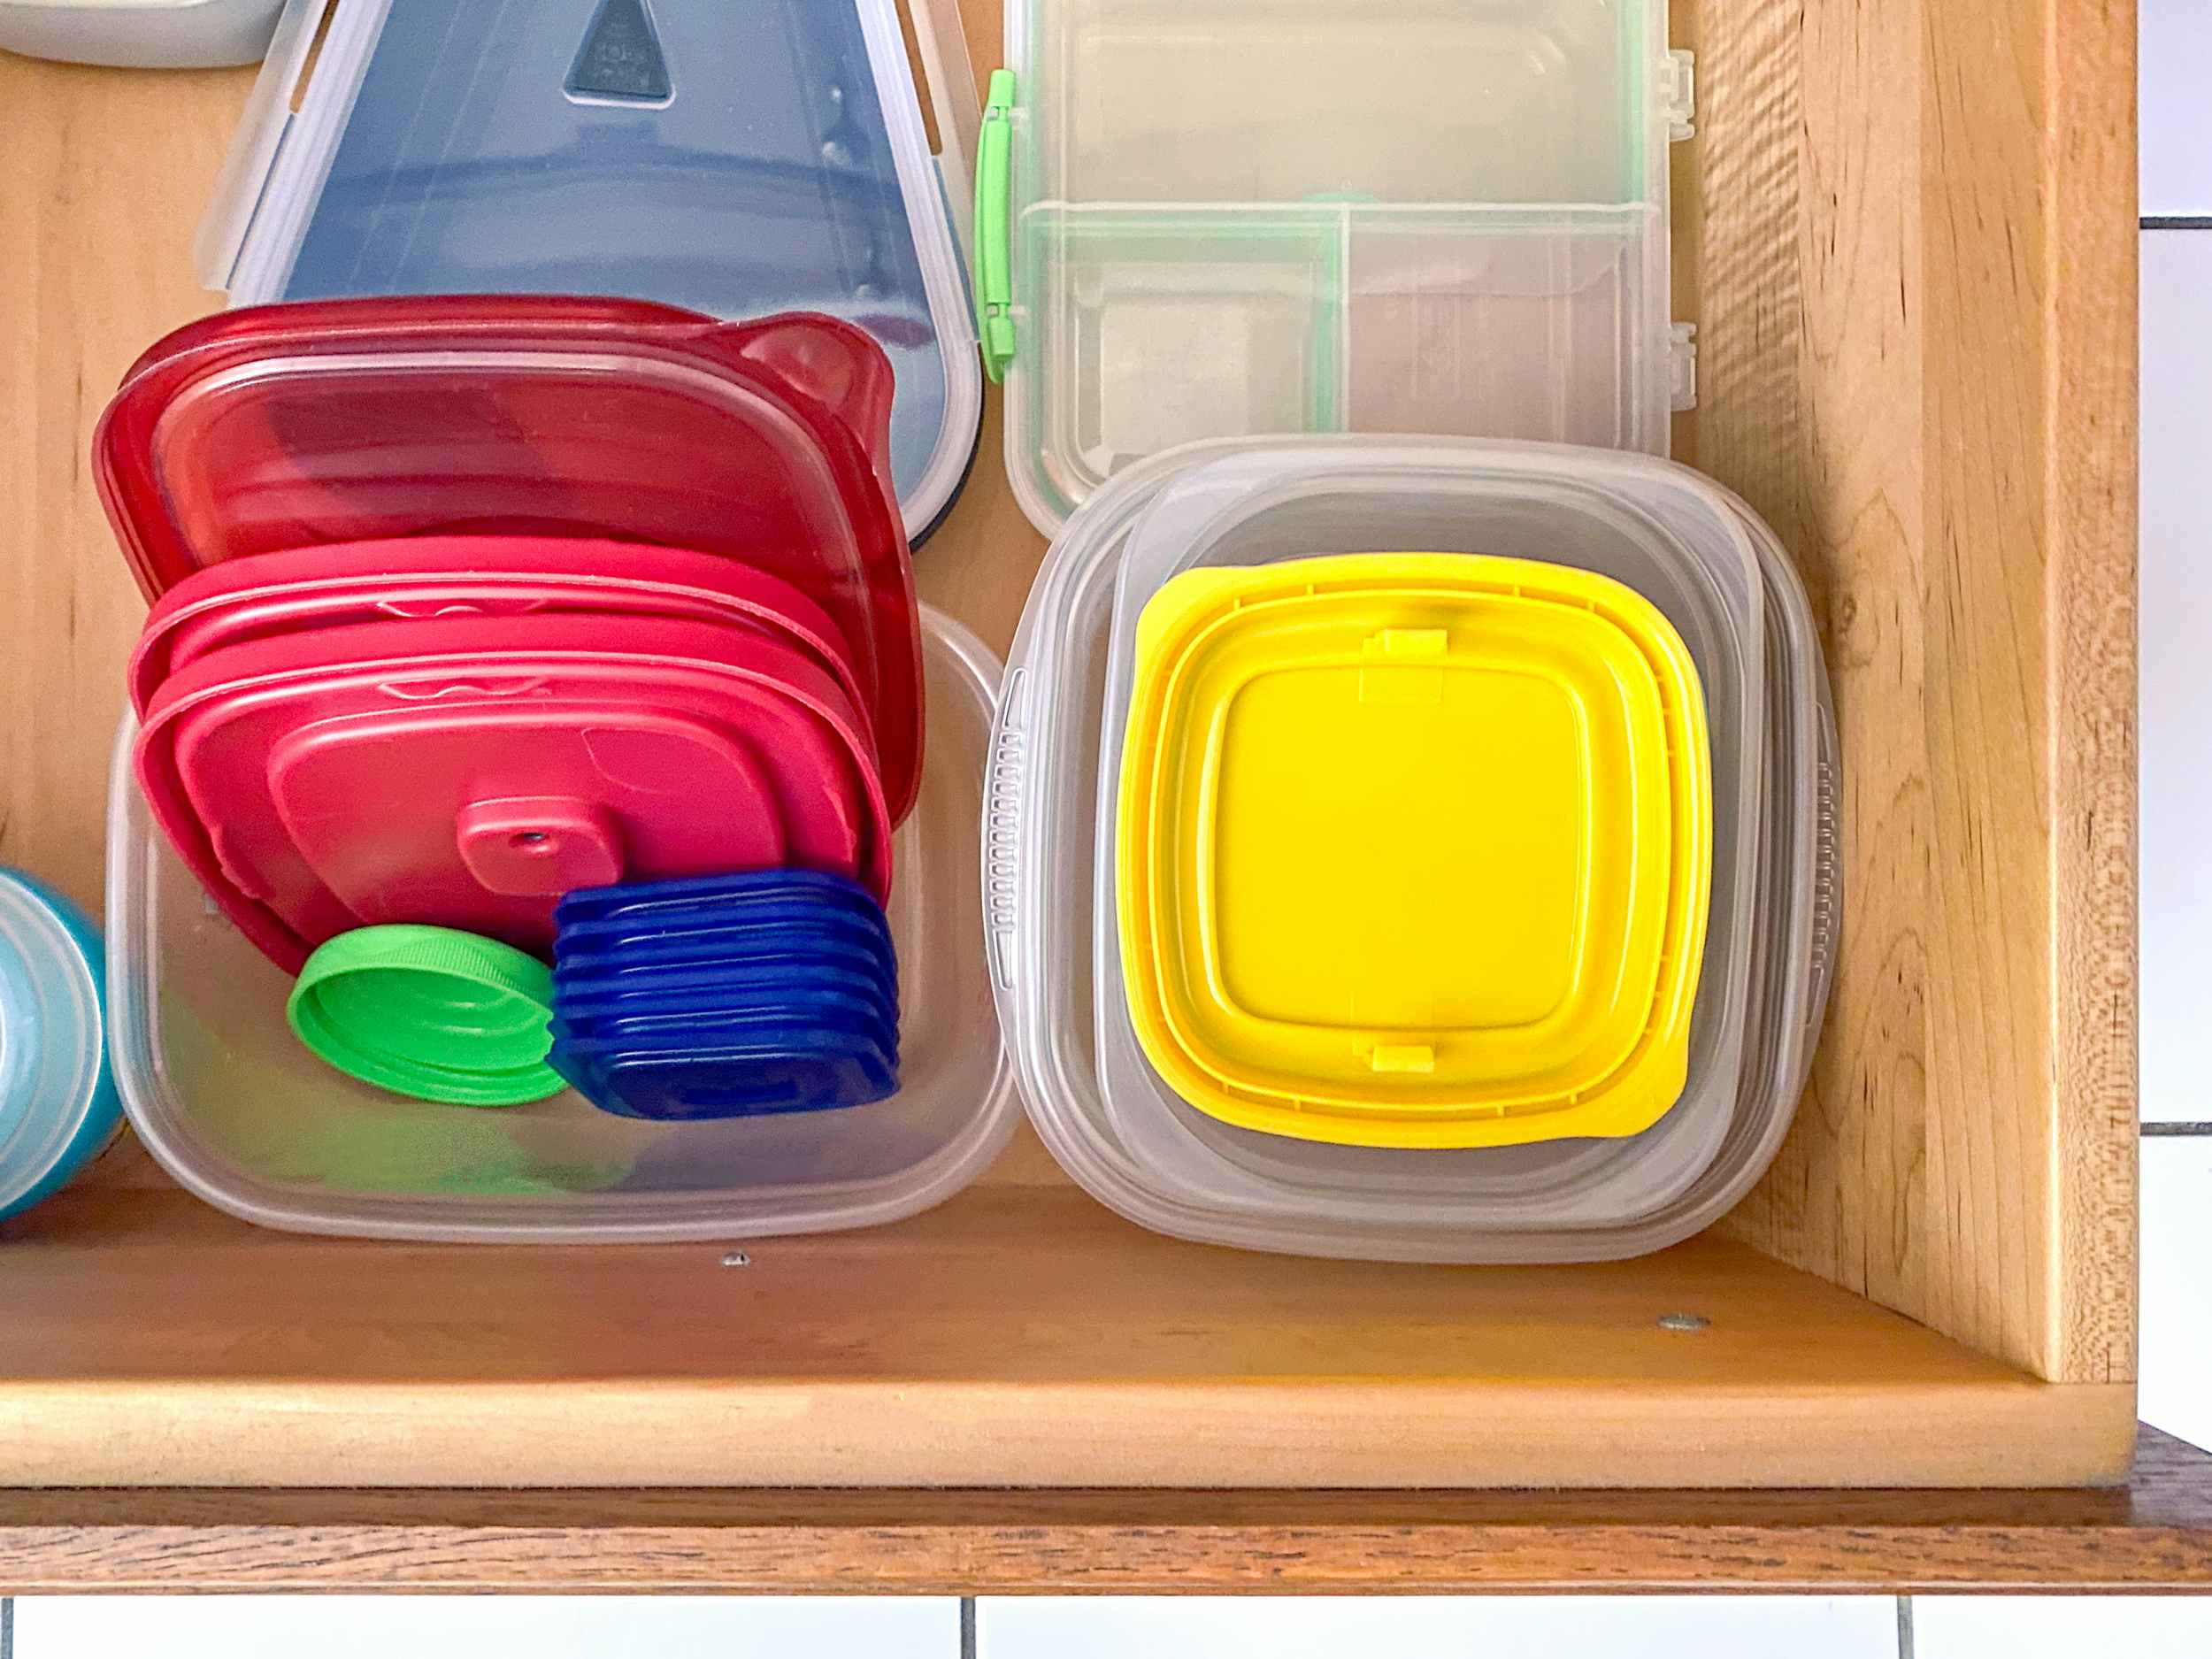 https://prod-cdn-thekrazycouponlady.imgix.net/wp-content/uploads/2017/04/kitchen-tupperware-organization-nesting-containers-drawer-1690584065-1690584065.jpg?auto=format&fit=fill&q=25